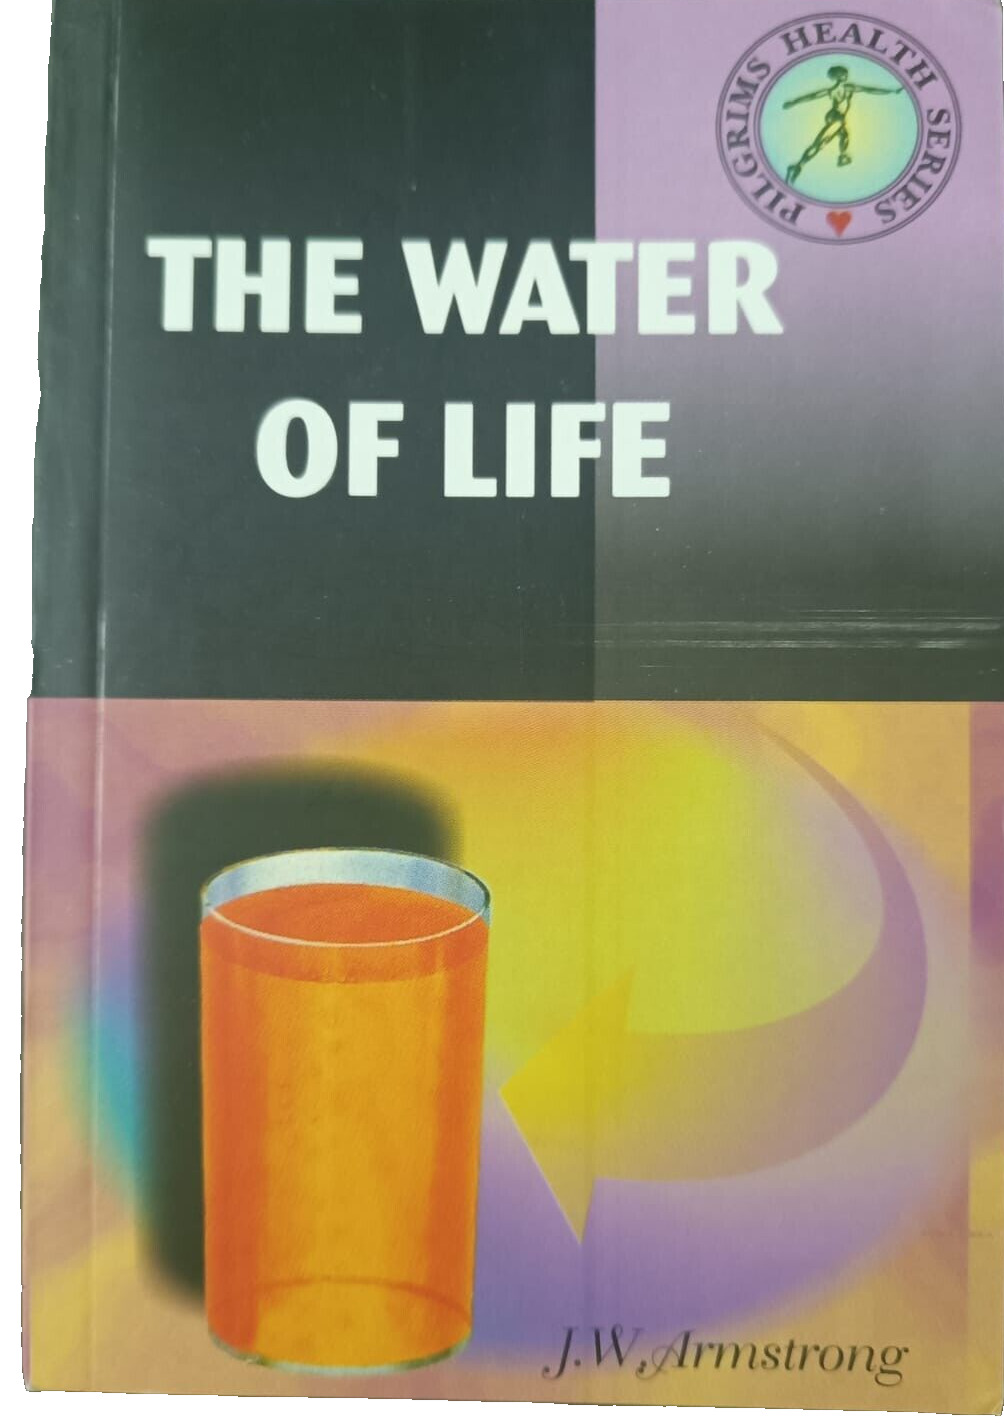 THE WATER OF LIFE - URINE THERAPY BY JOHN W. ARMSTRONG PAGES 202, PRINT 2004